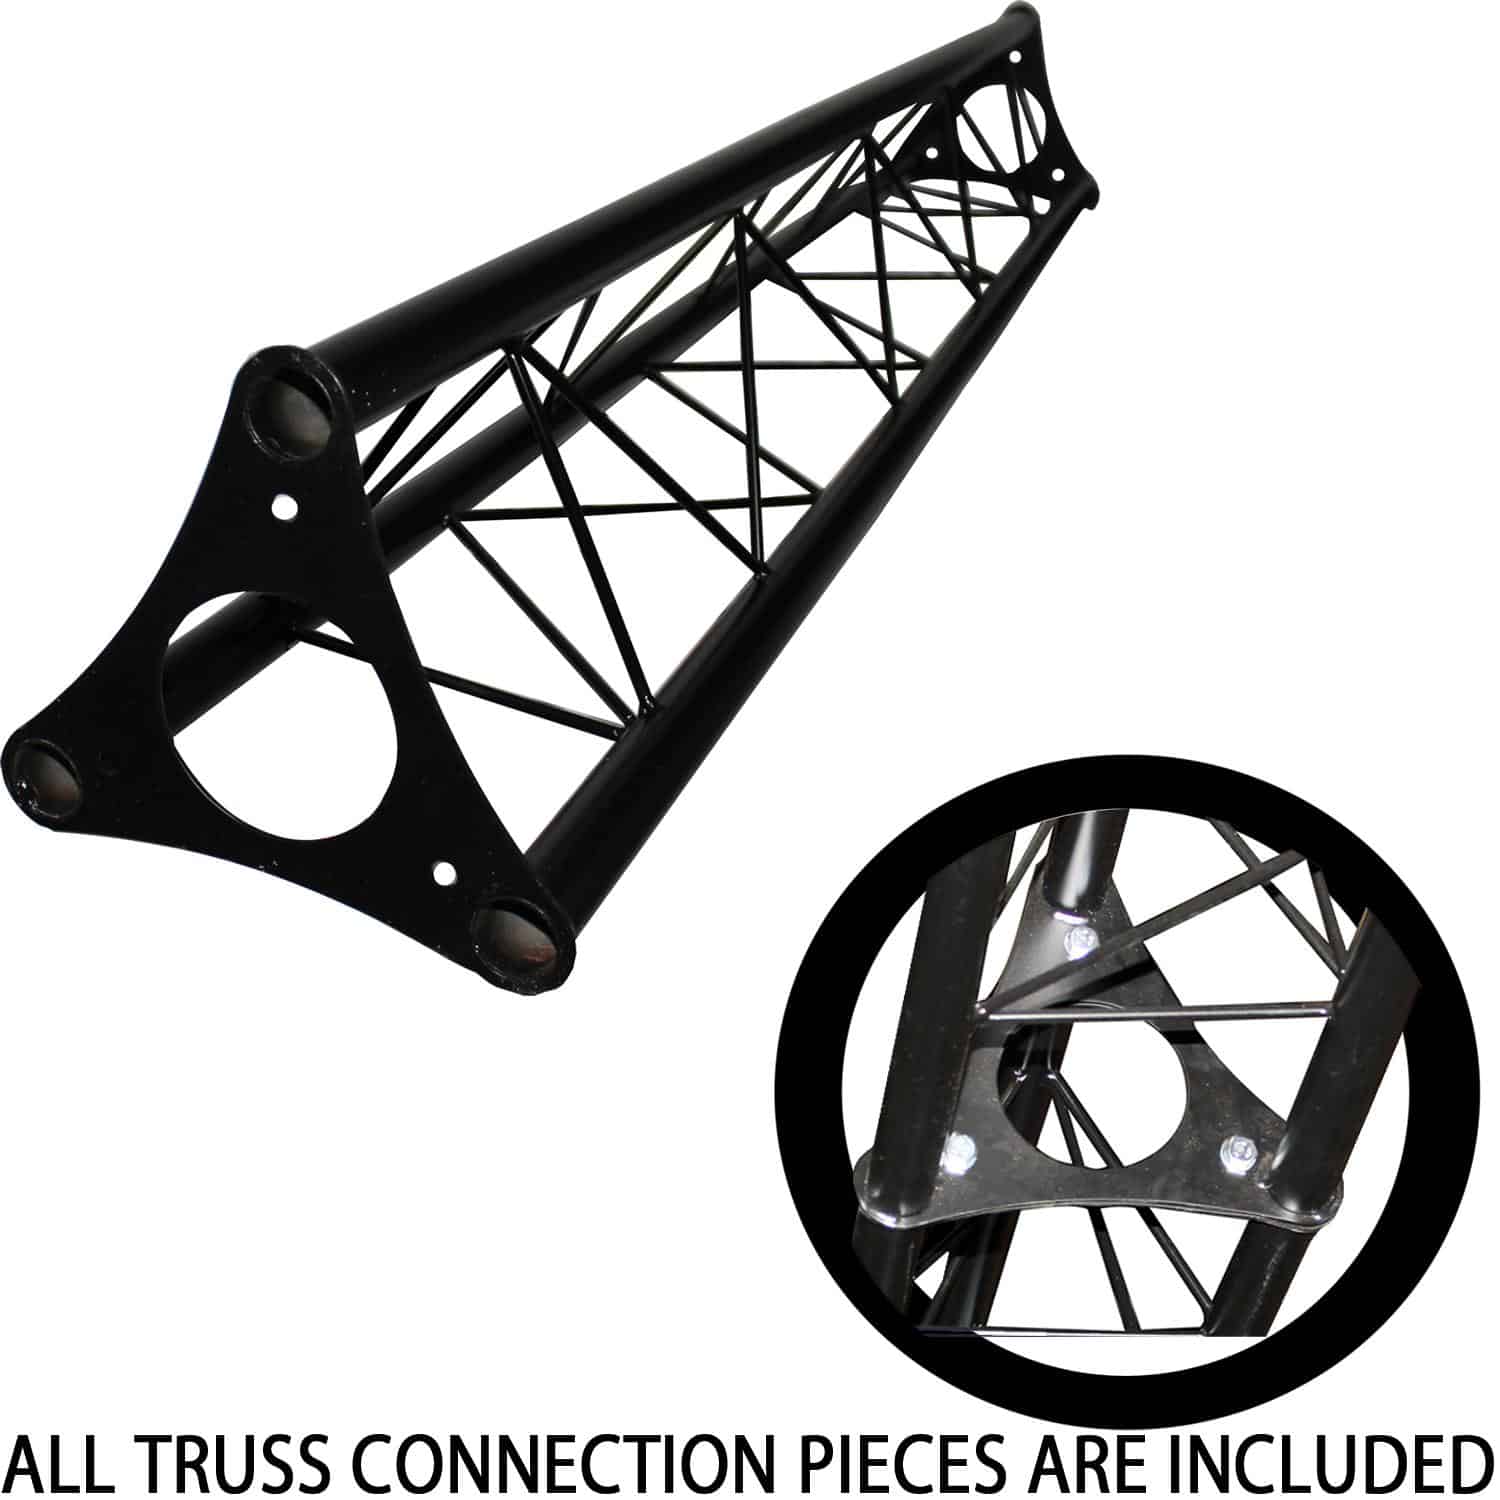 Triangle Crank Up Truss System (5,10 or 15 Feet)